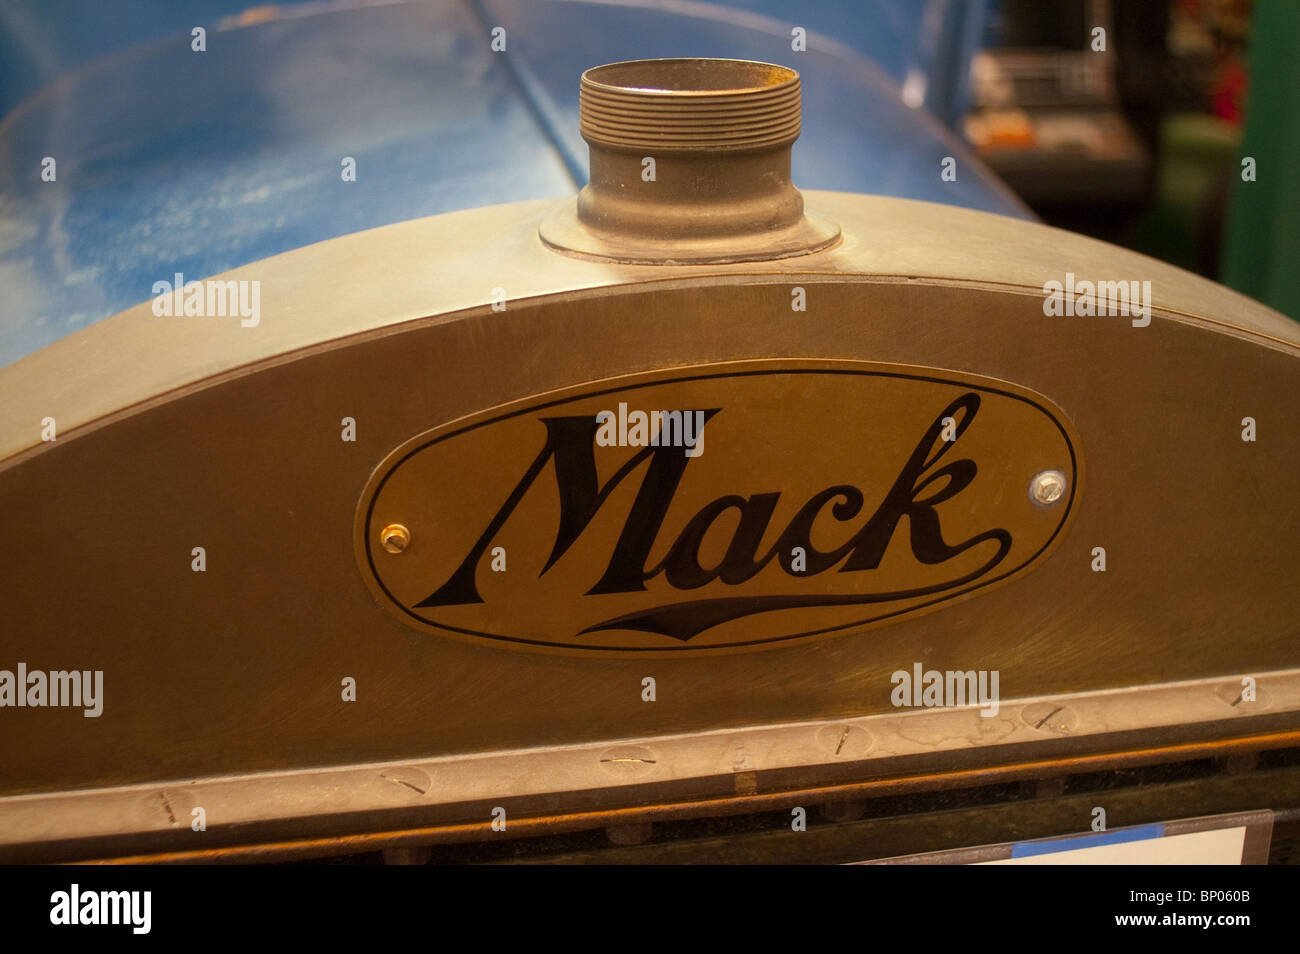 Front end of an antique Mack vehicle Stock Photo